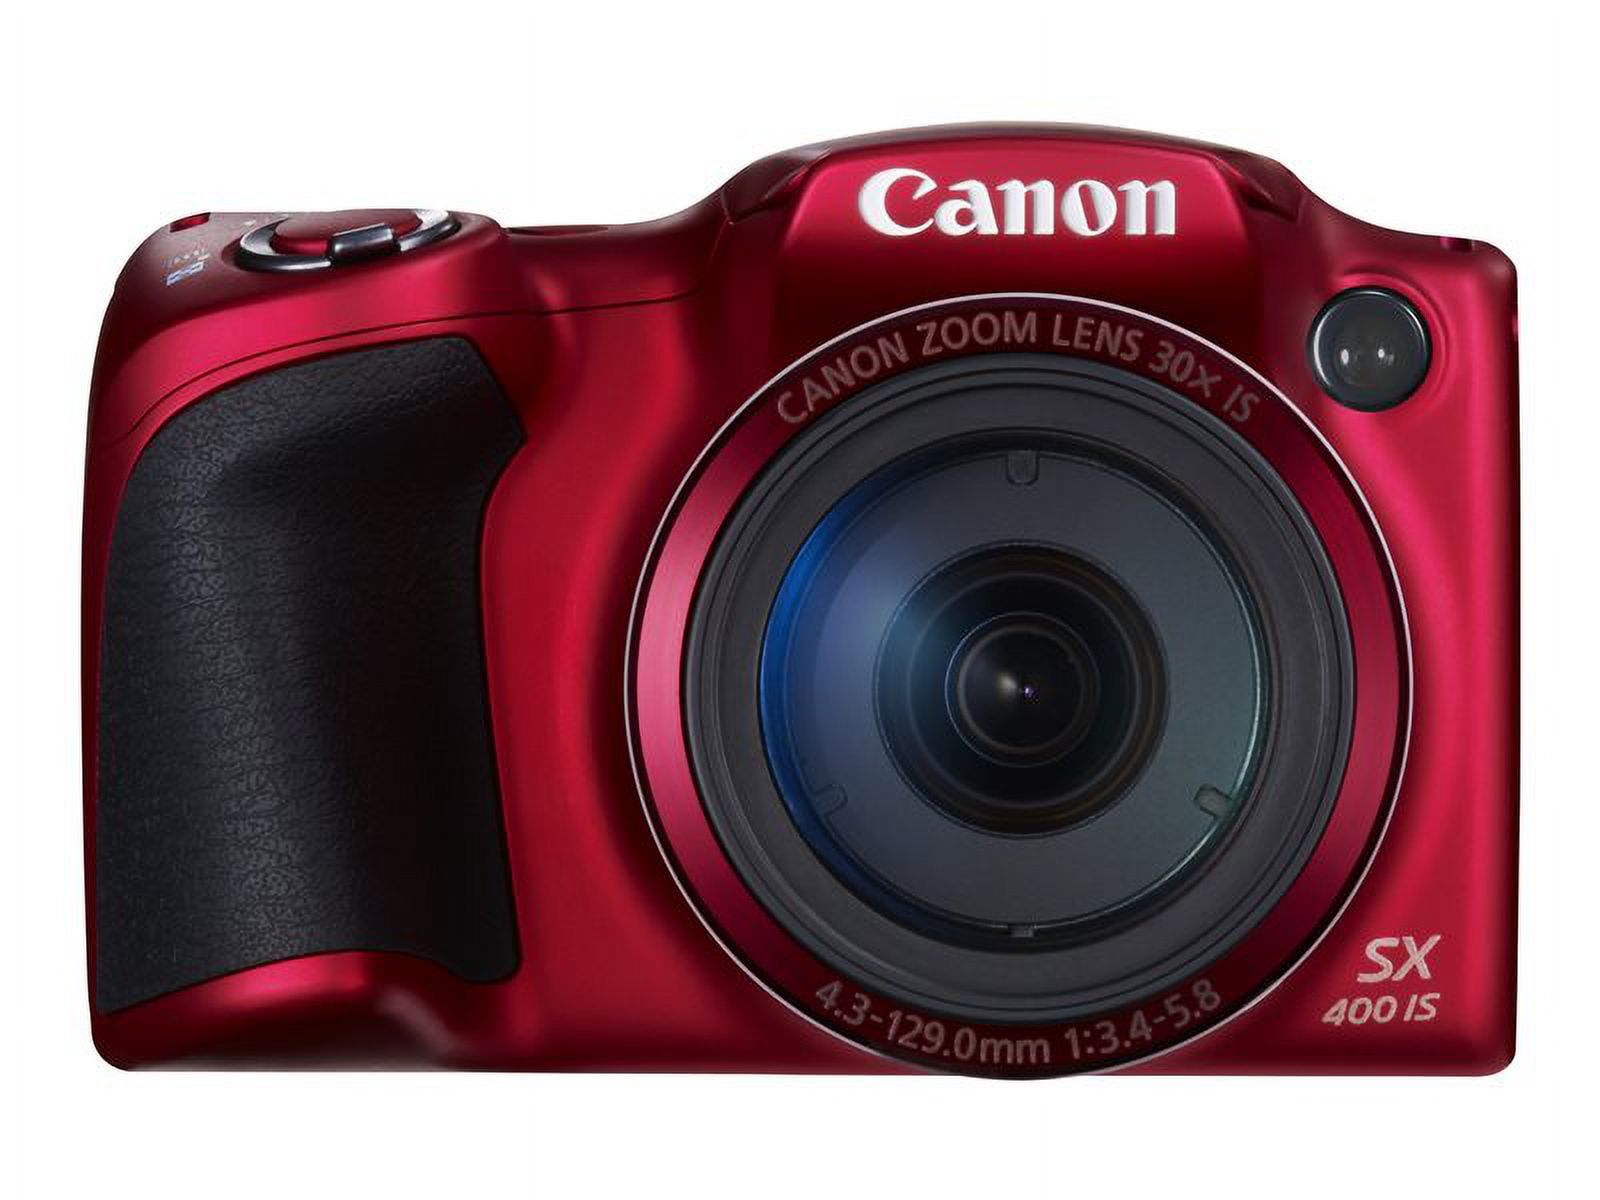 Canon PowerShot SX400 IS - Digital camera - High Definition - compact - 16.0 MP - 30 x optical zoom - red - image 6 of 72